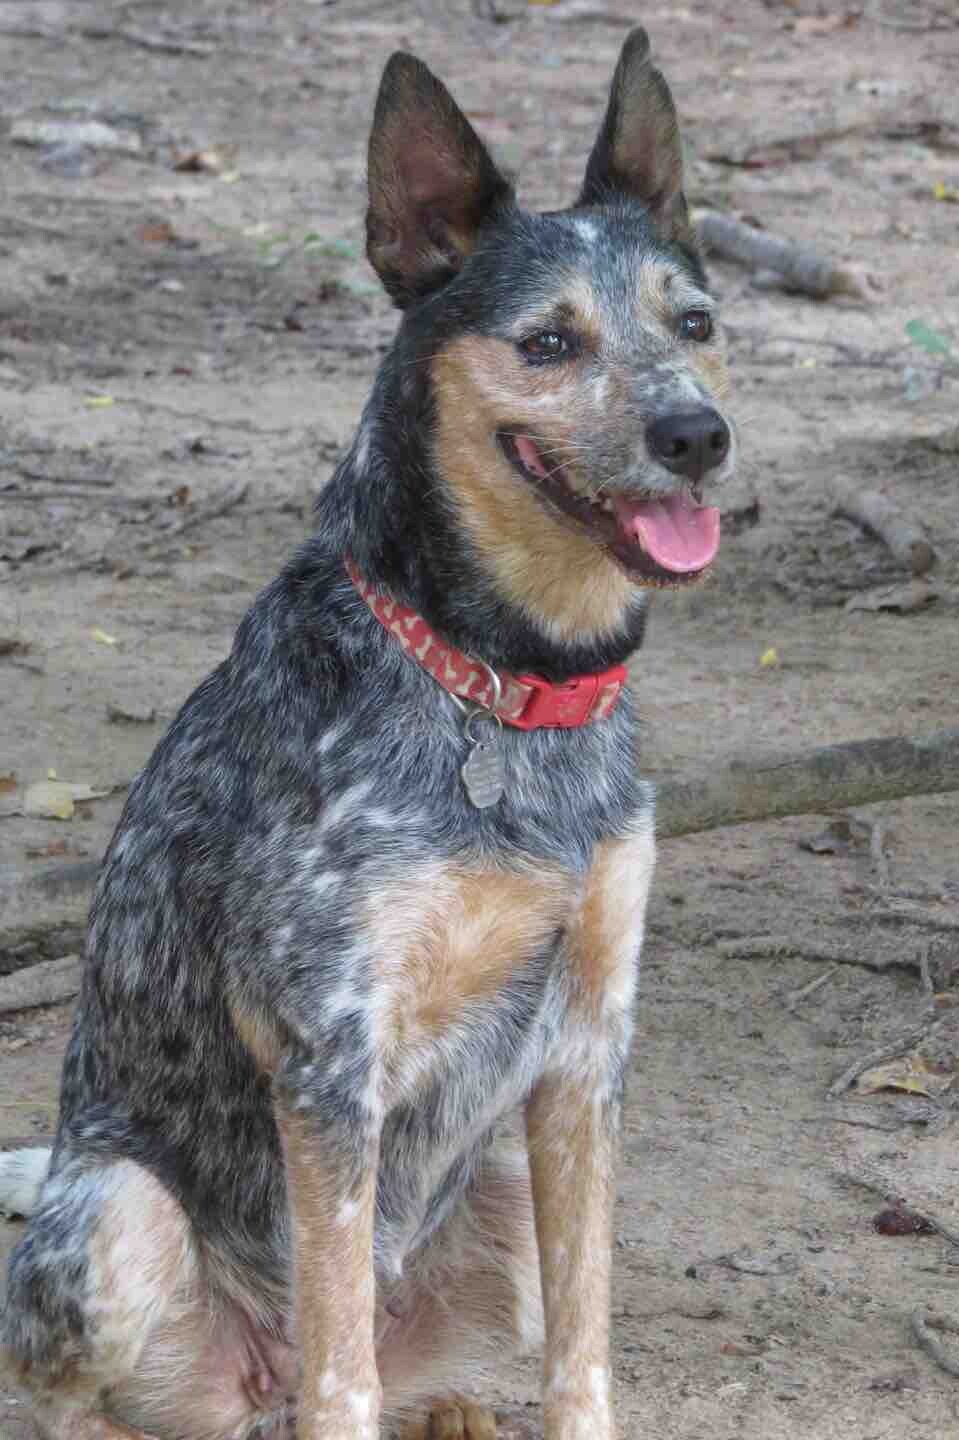 australian cattle dog wags its tail